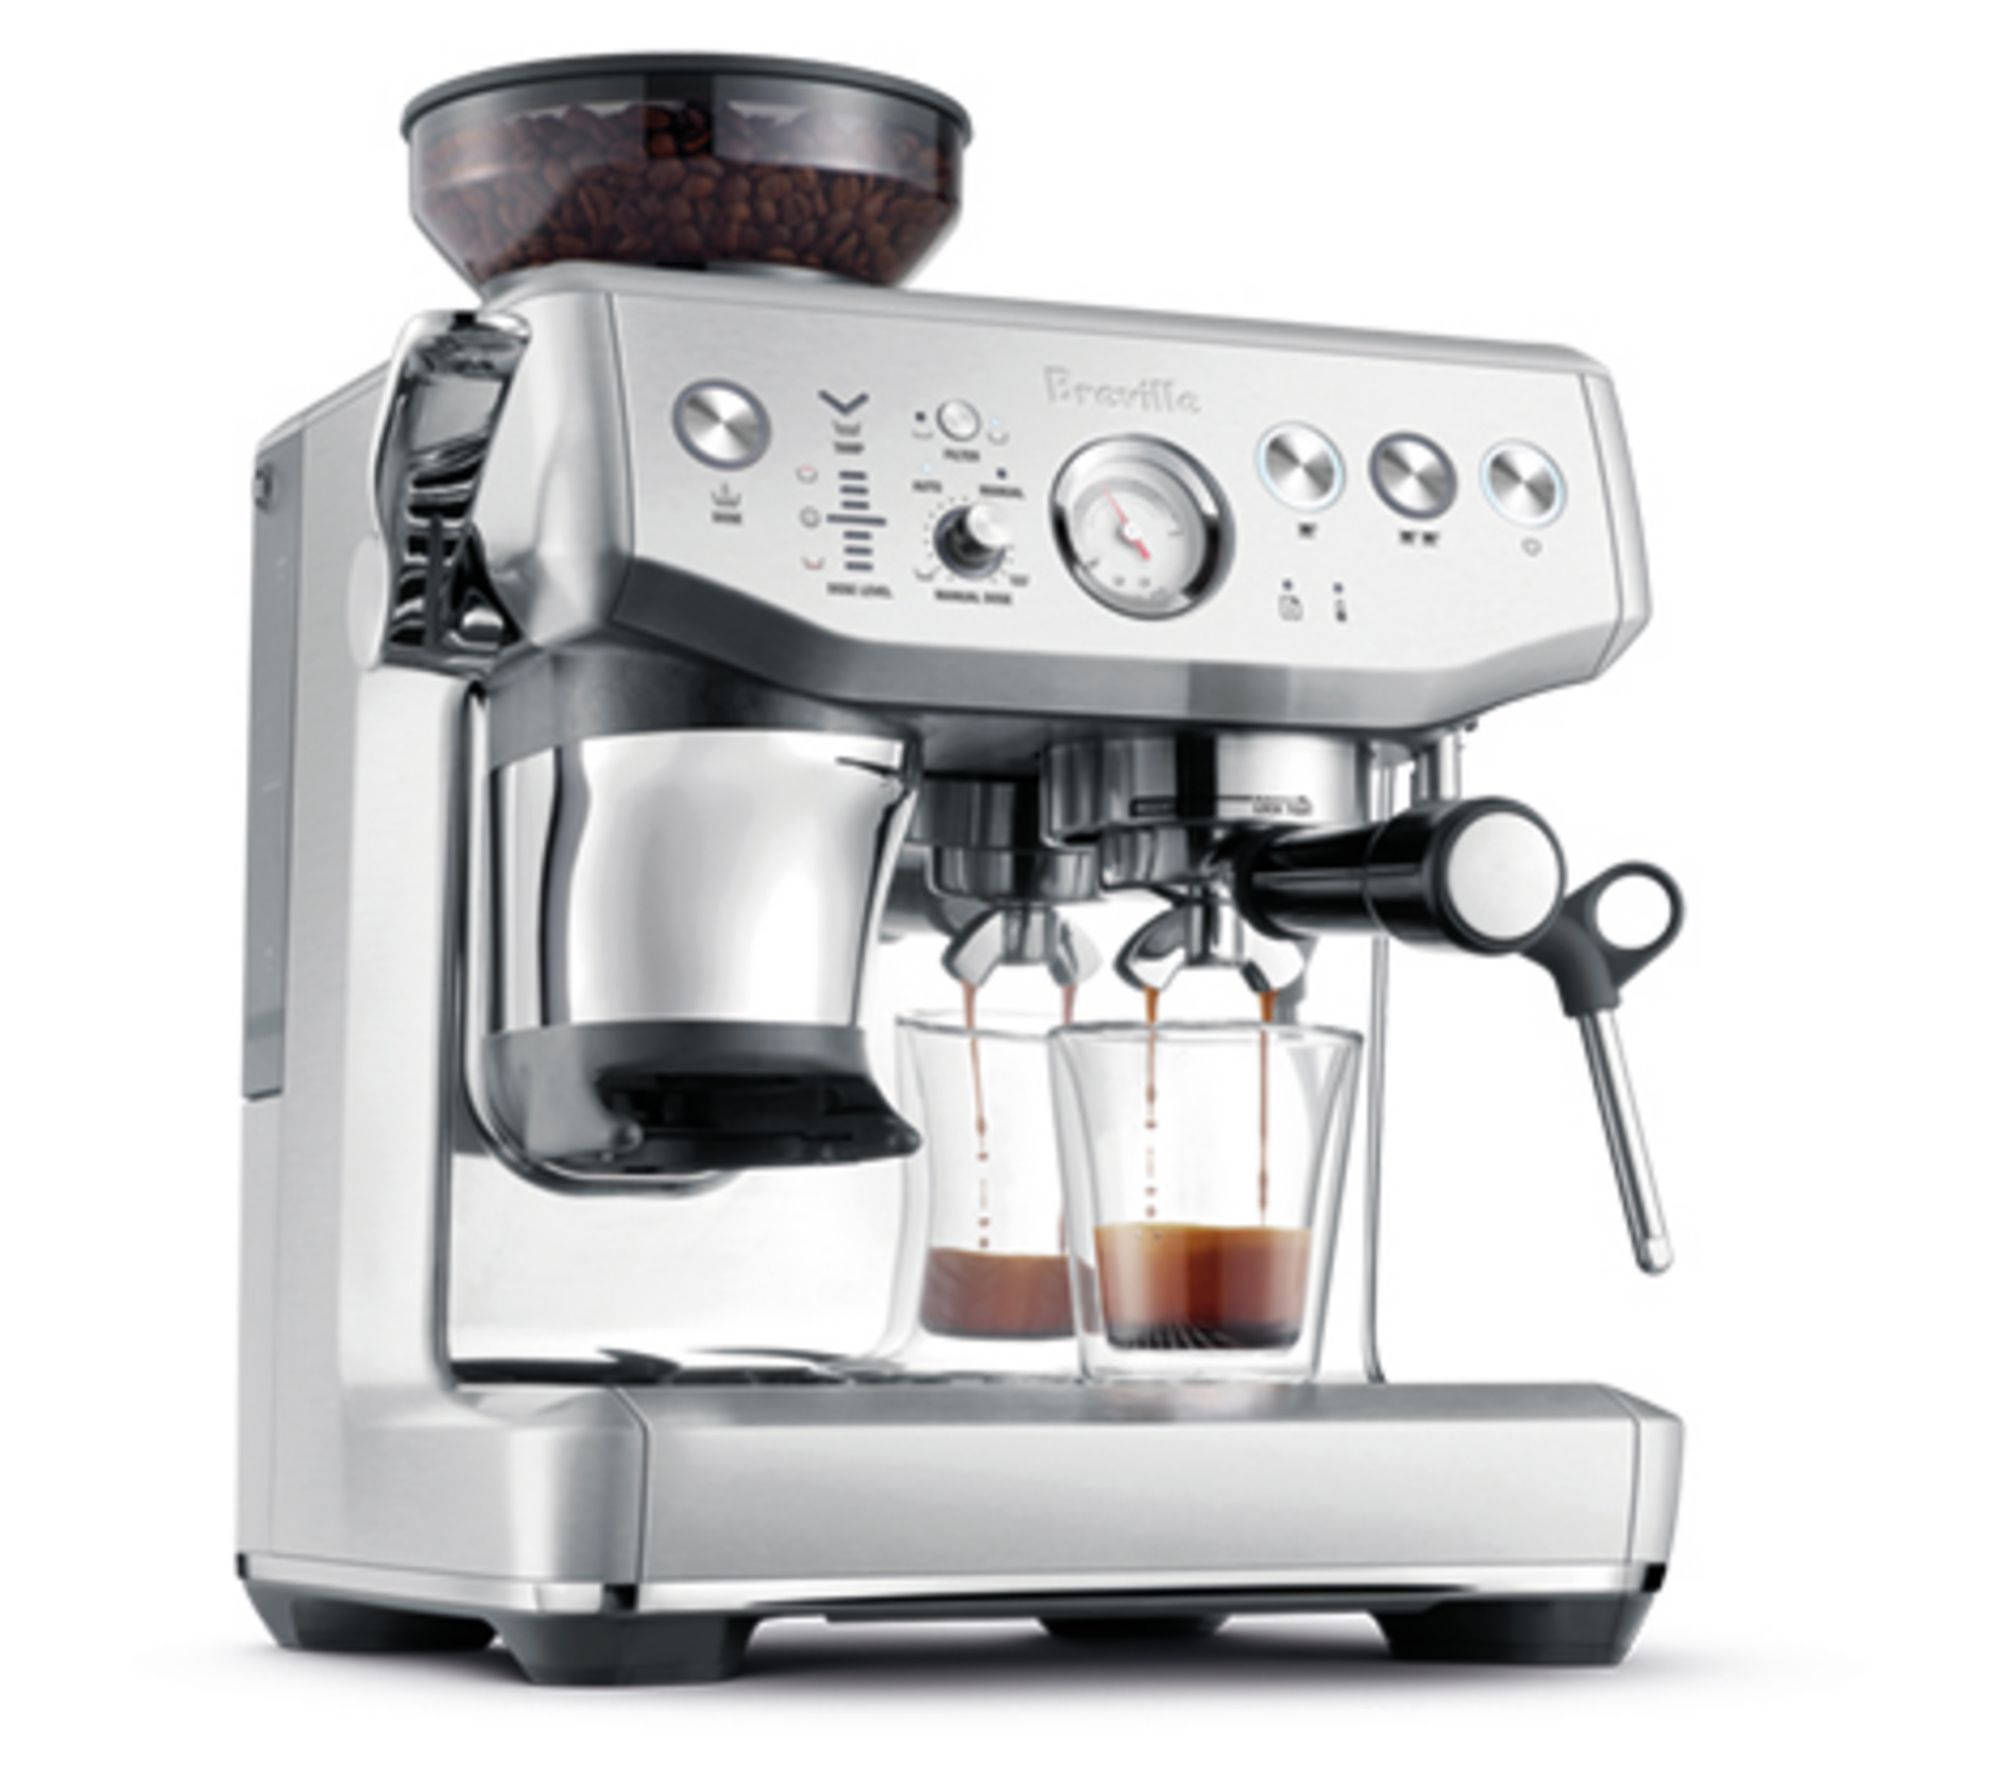 Barista tools - Coffee icon :We supply everything you need about